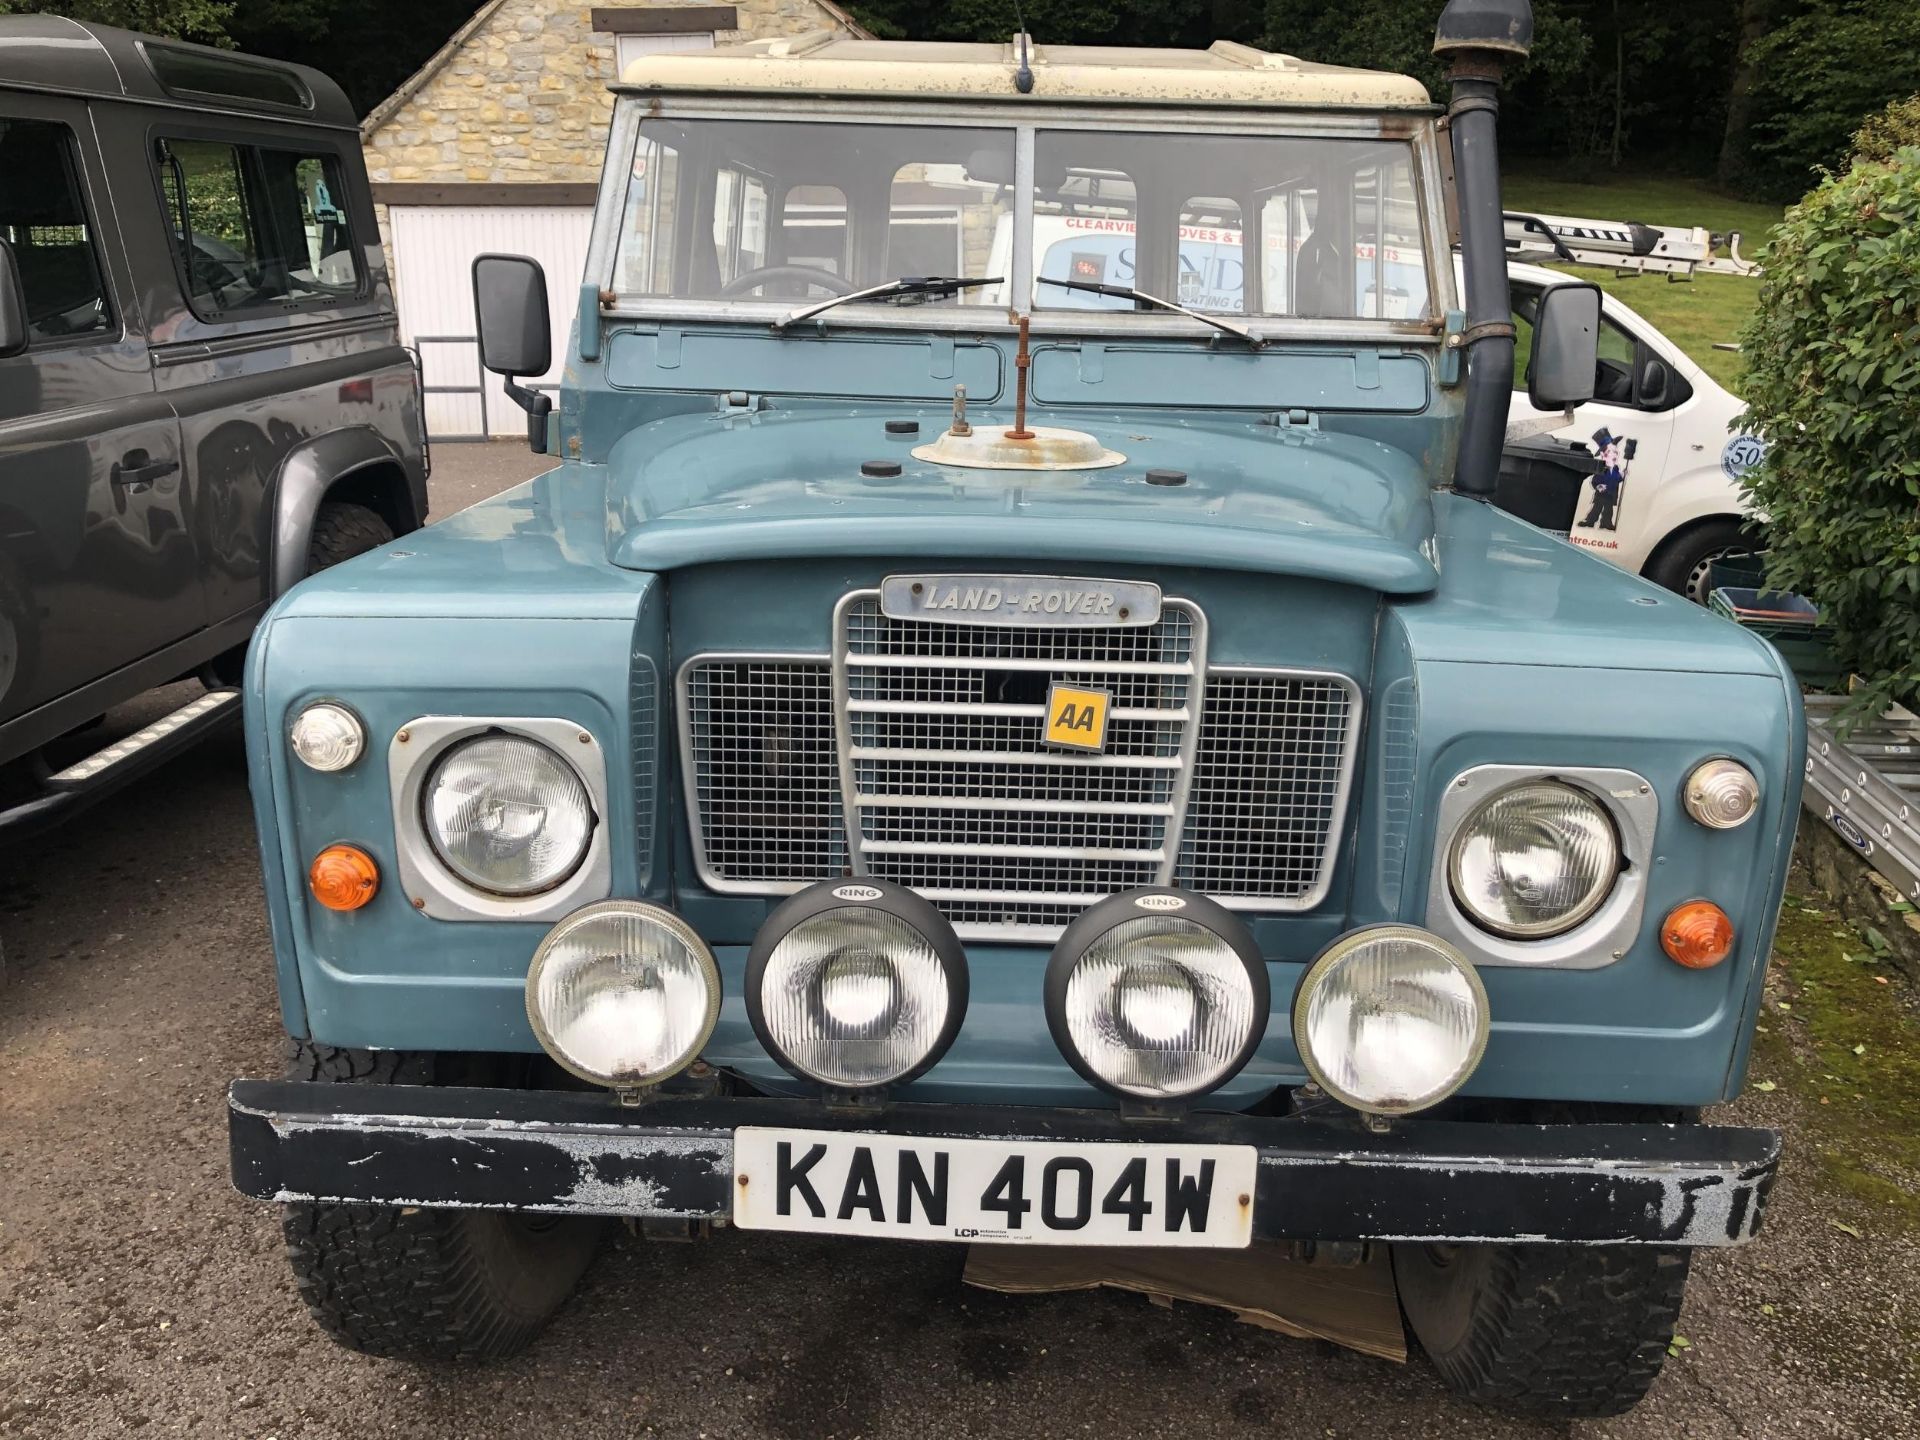 1981 Land Rover 88 inch Series III Registration number KAN 404W Blue with a white roof 2,286 cc - Image 2 of 51